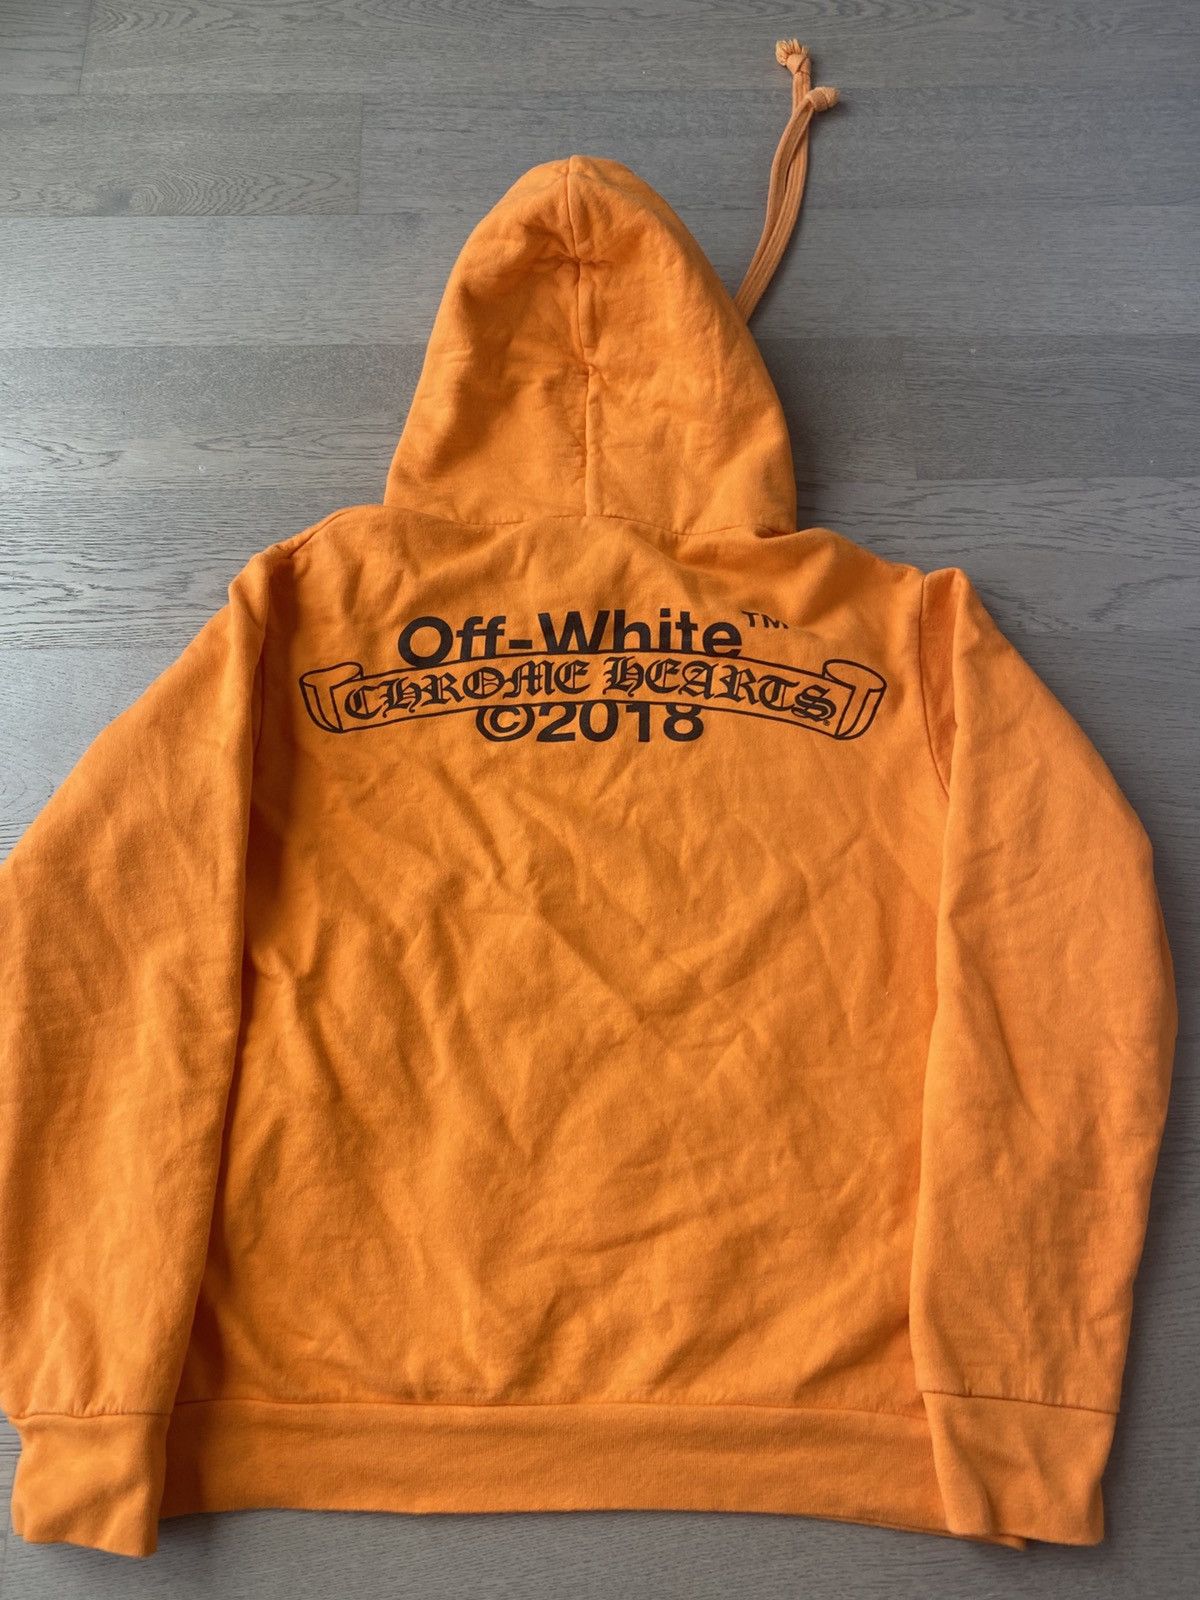 Off-White Chrome Hearts x Off White Pullover Hoodie Size US S / EU 44-46 / 1 - 2 Preview